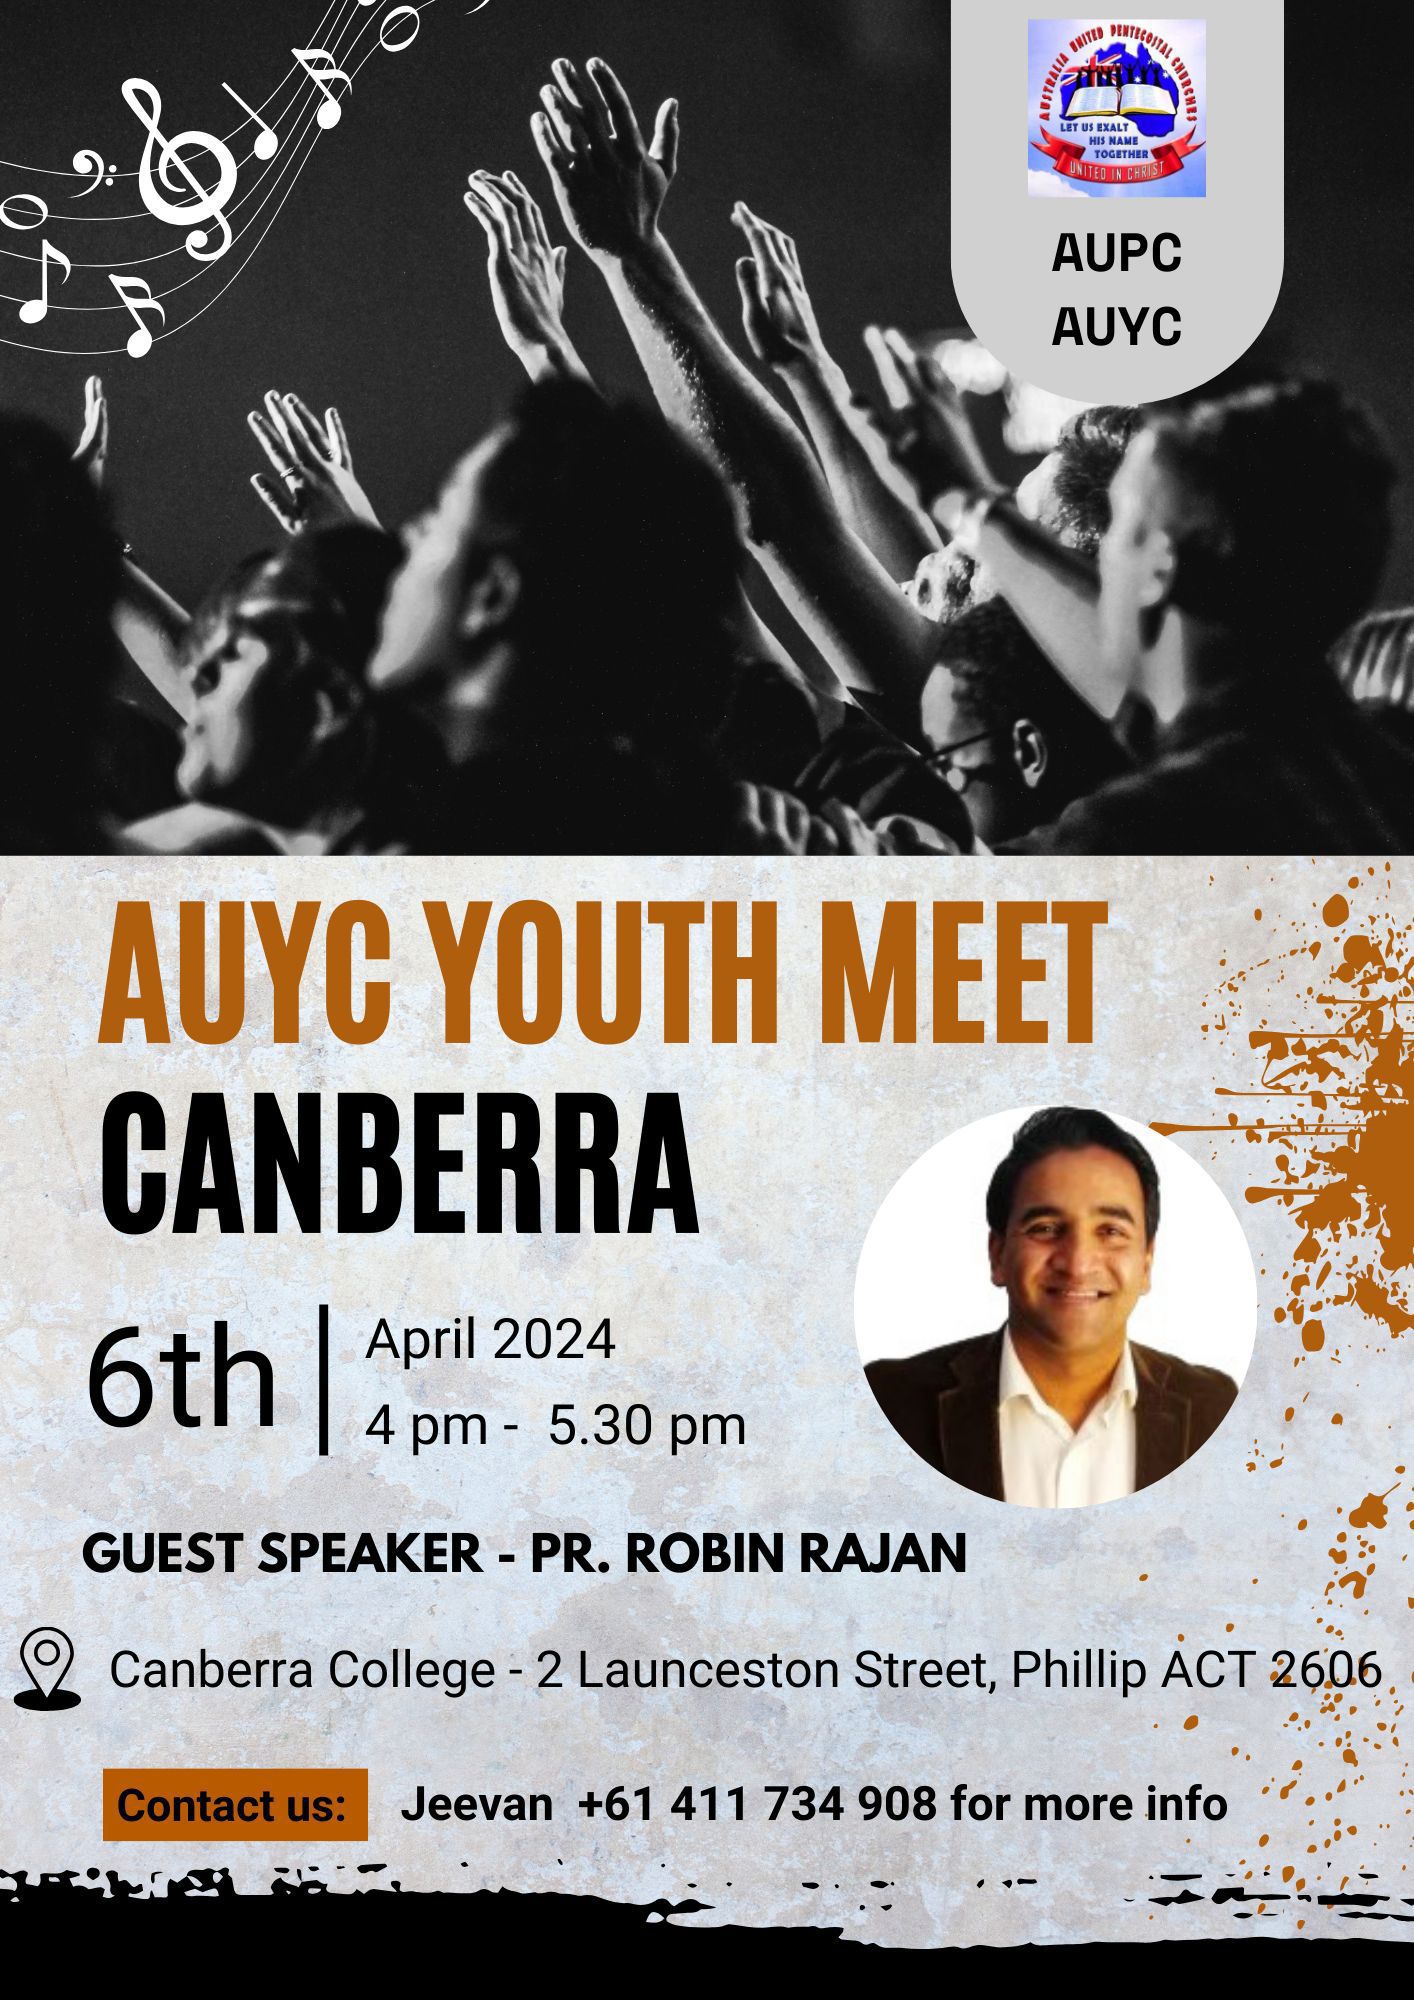 AUPC 11th National Conference - Youth Meet